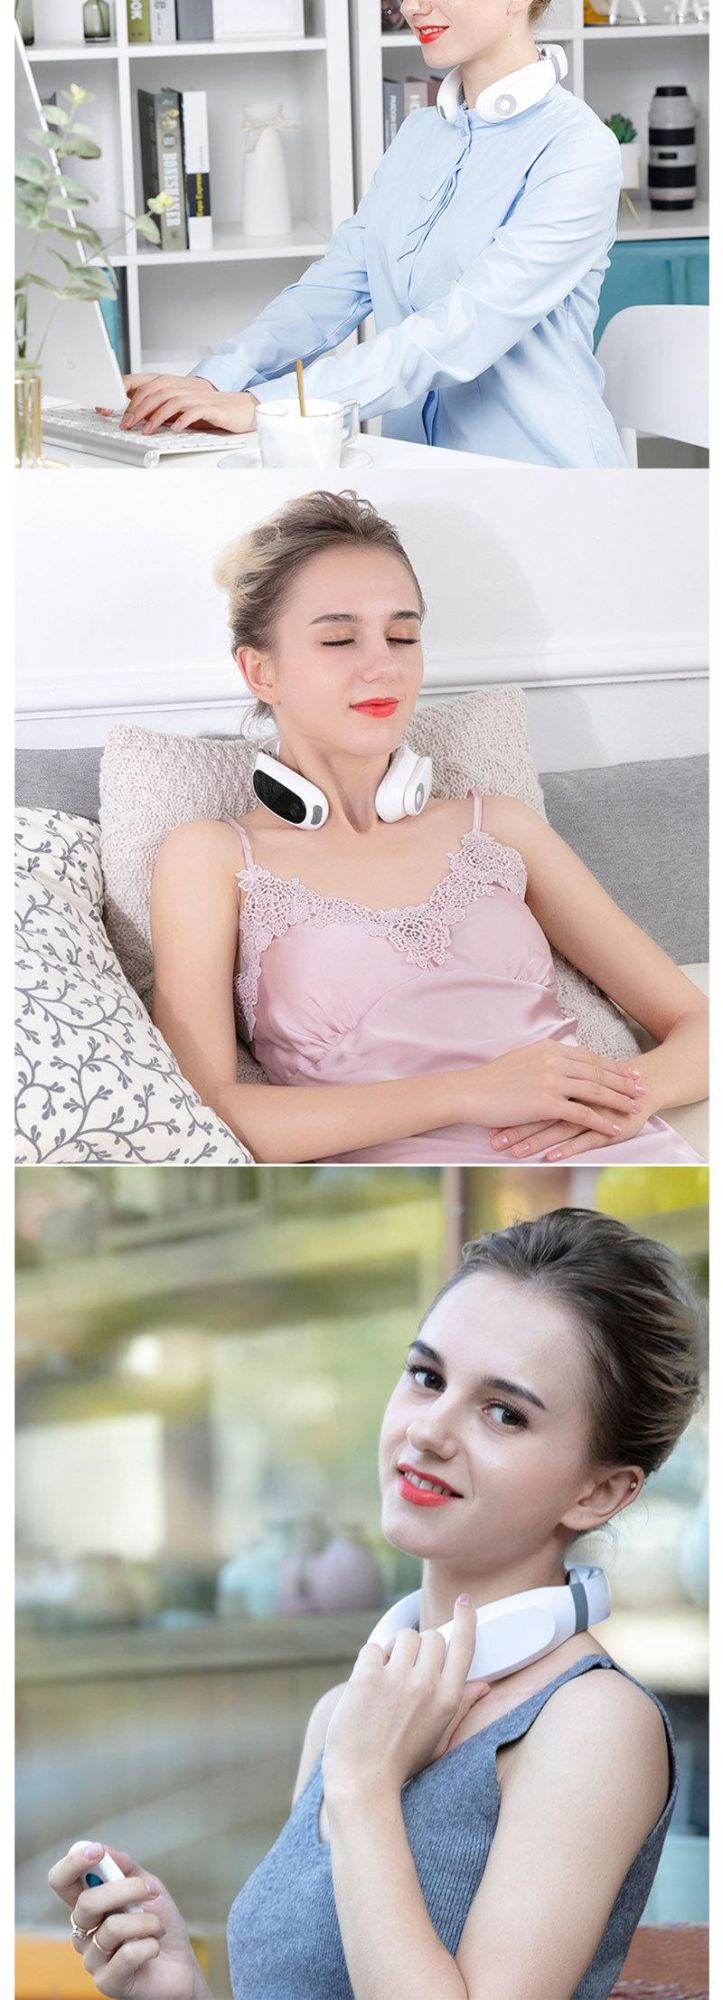 Electric Heating Physical Therapy Neck Massager Smart Wireless Pulse Neck Massage Device